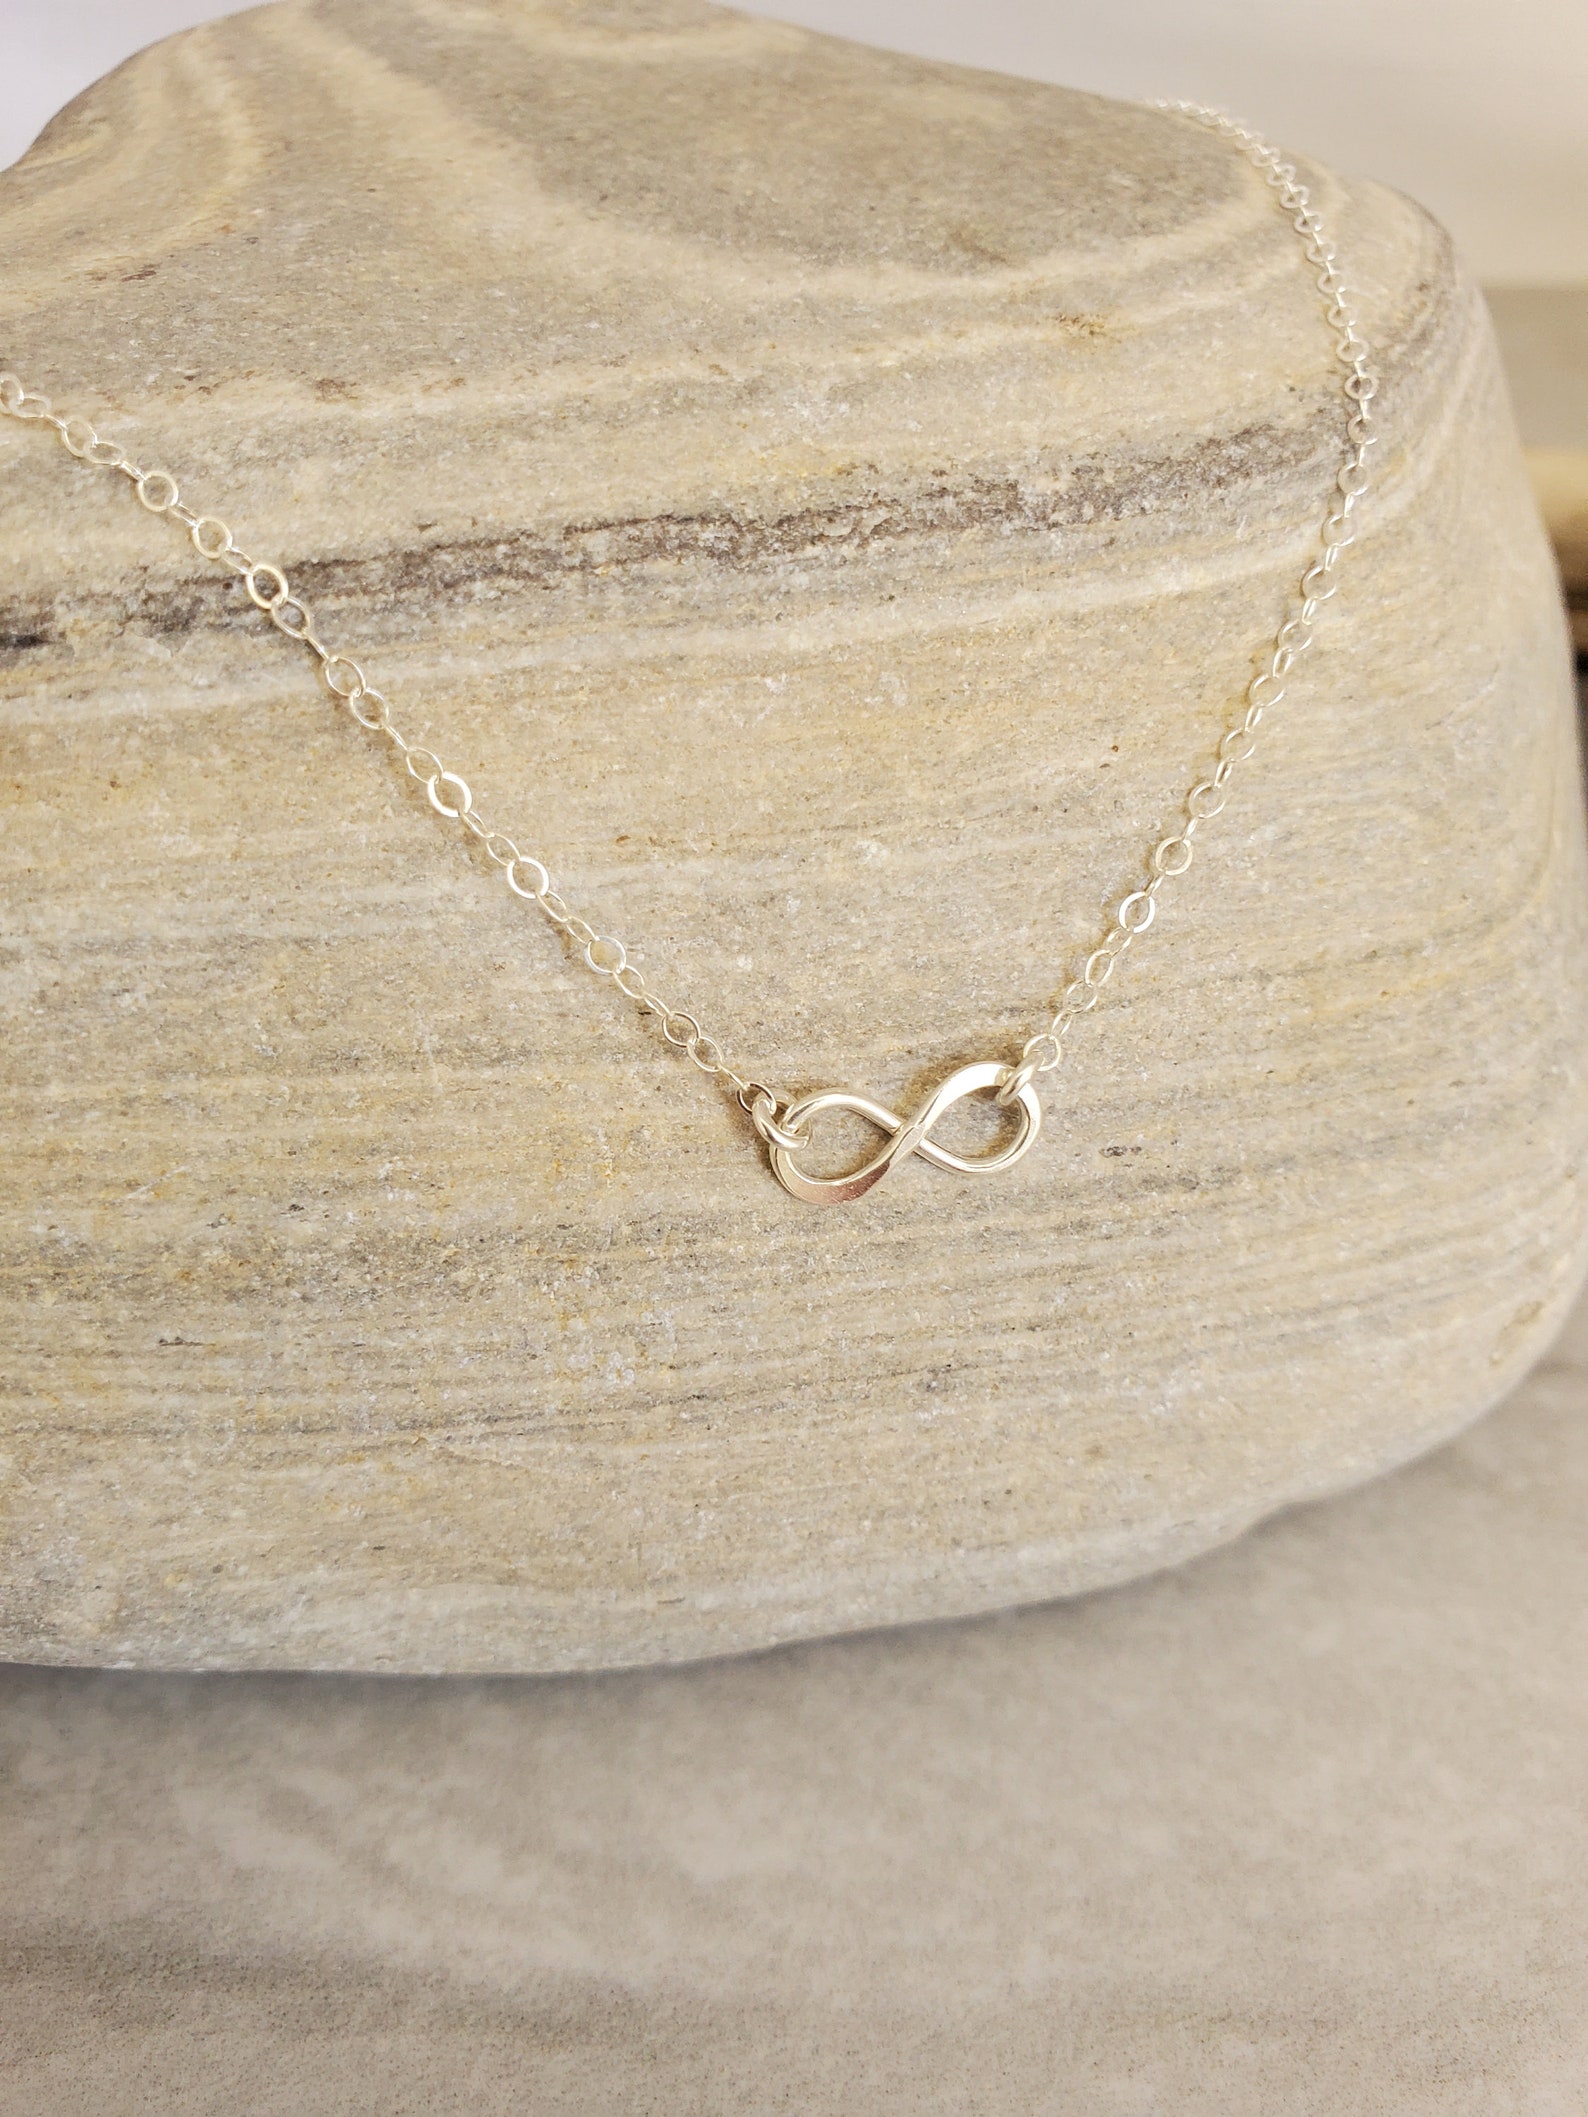 Tiny Infinity Necklace Sterling Silver Infinity Pendant - Etsy